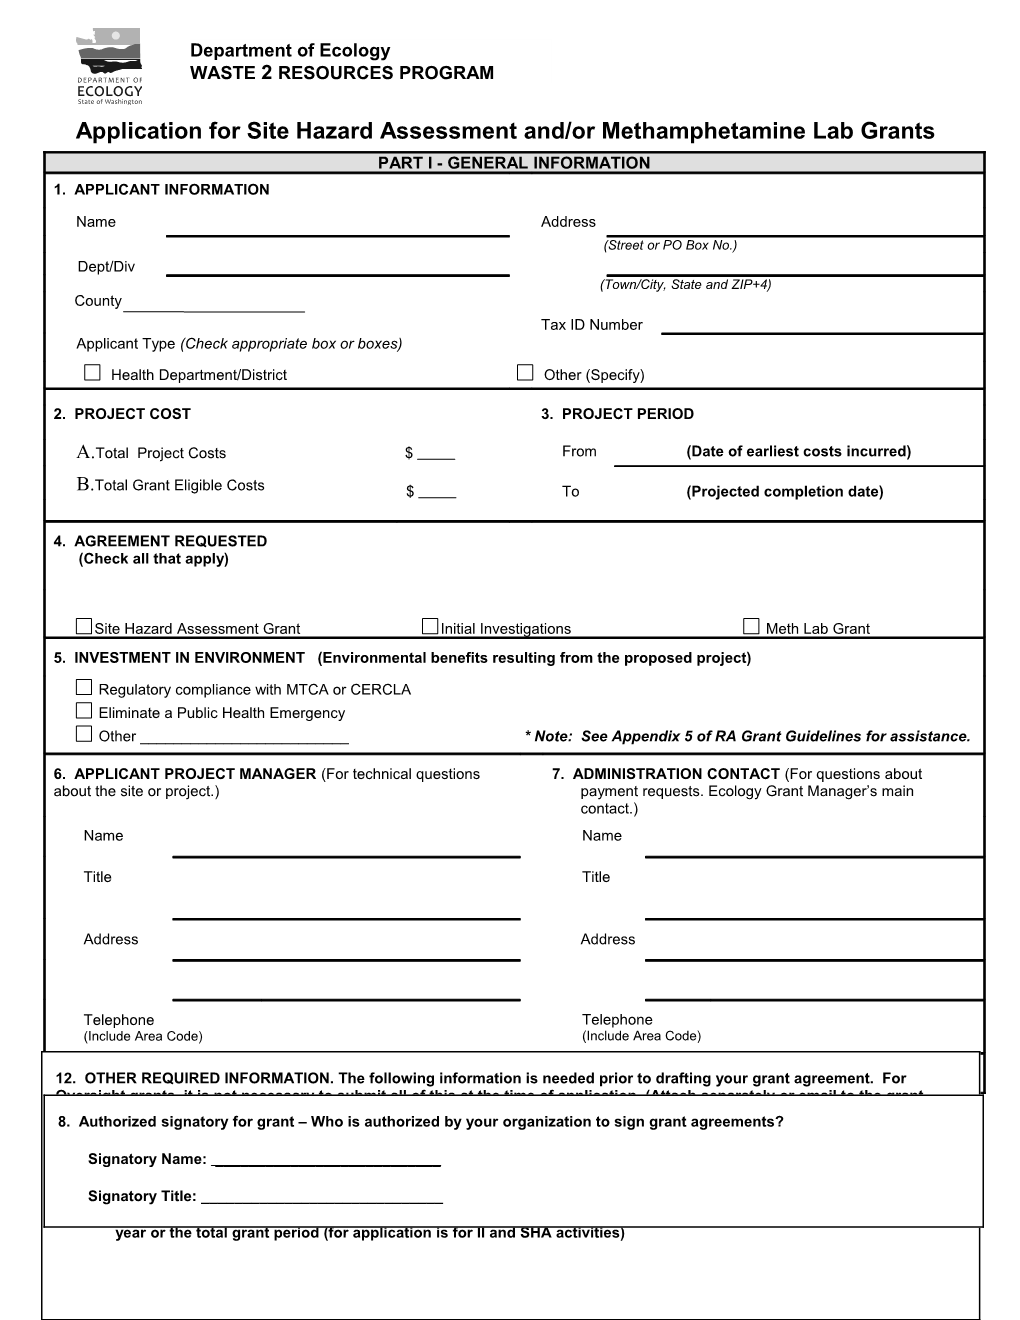 Application for Site Hazard Assessment And/Or Methamphetamine Lab Grants